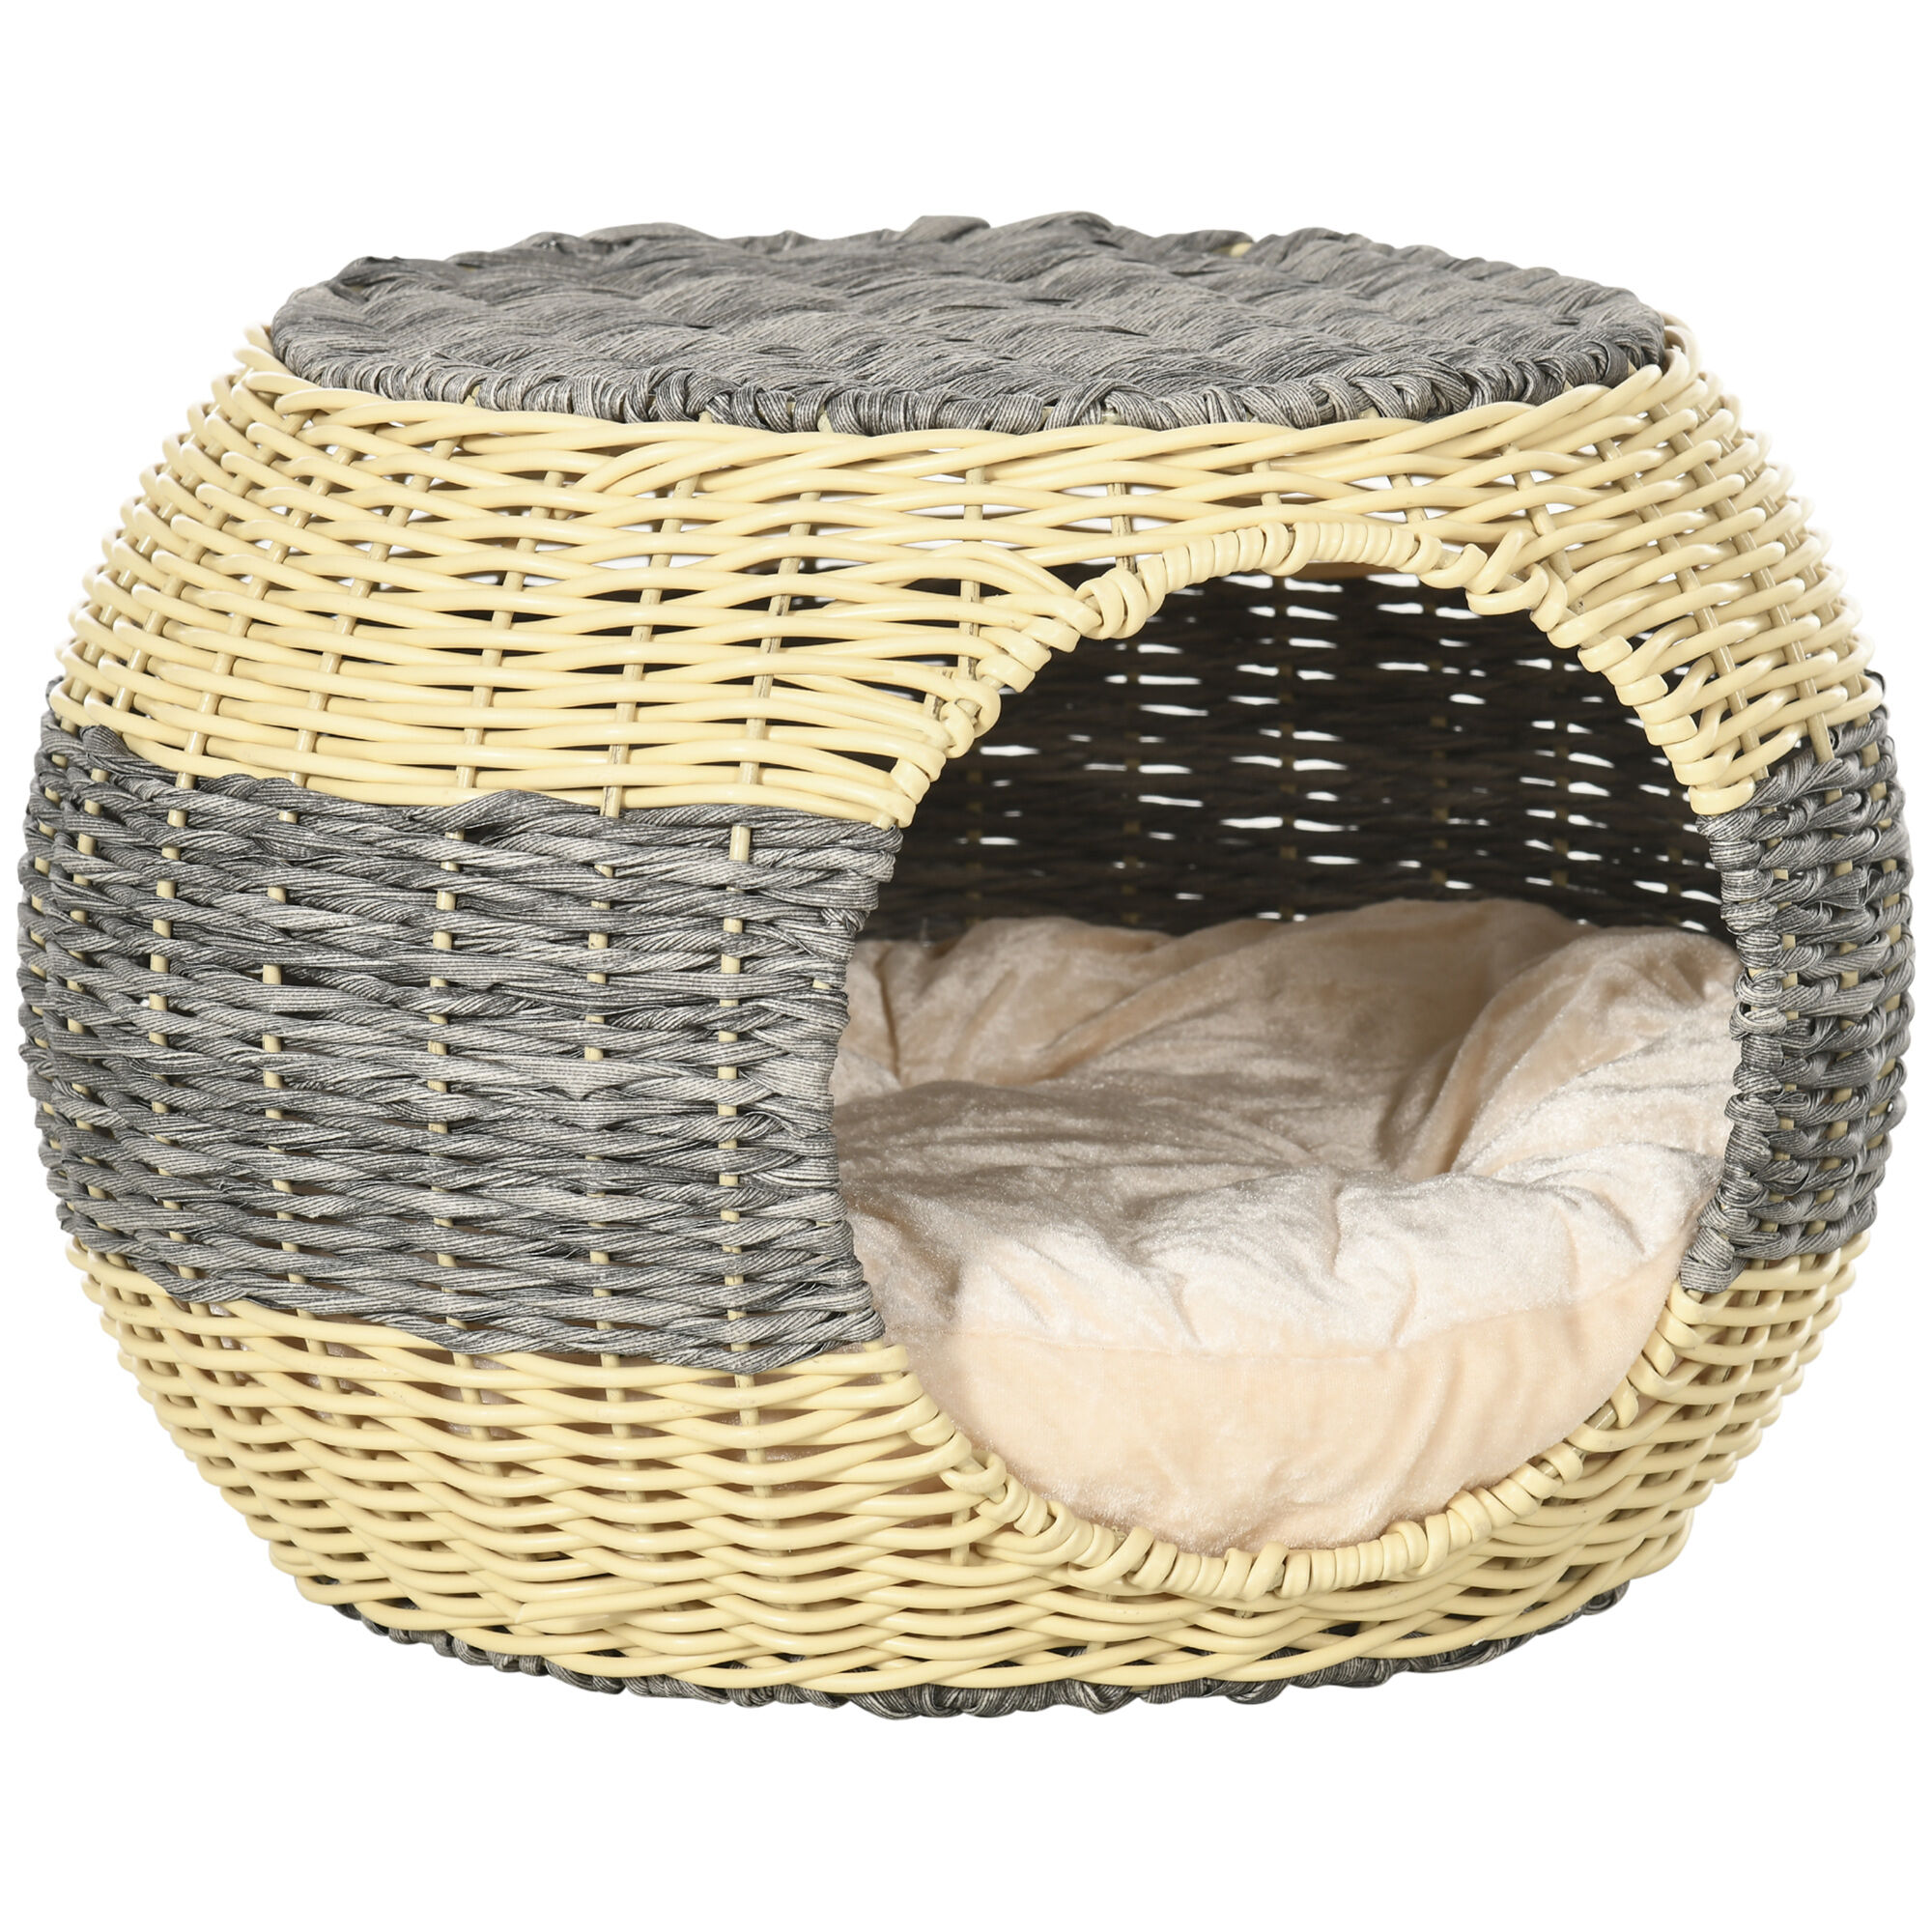 PawHut Wicker Dog House, Rattan Pet Bed, Cat House, End Table Furniture,  with Soft Cushion, Adjustable Feet, for X-Small Dogs